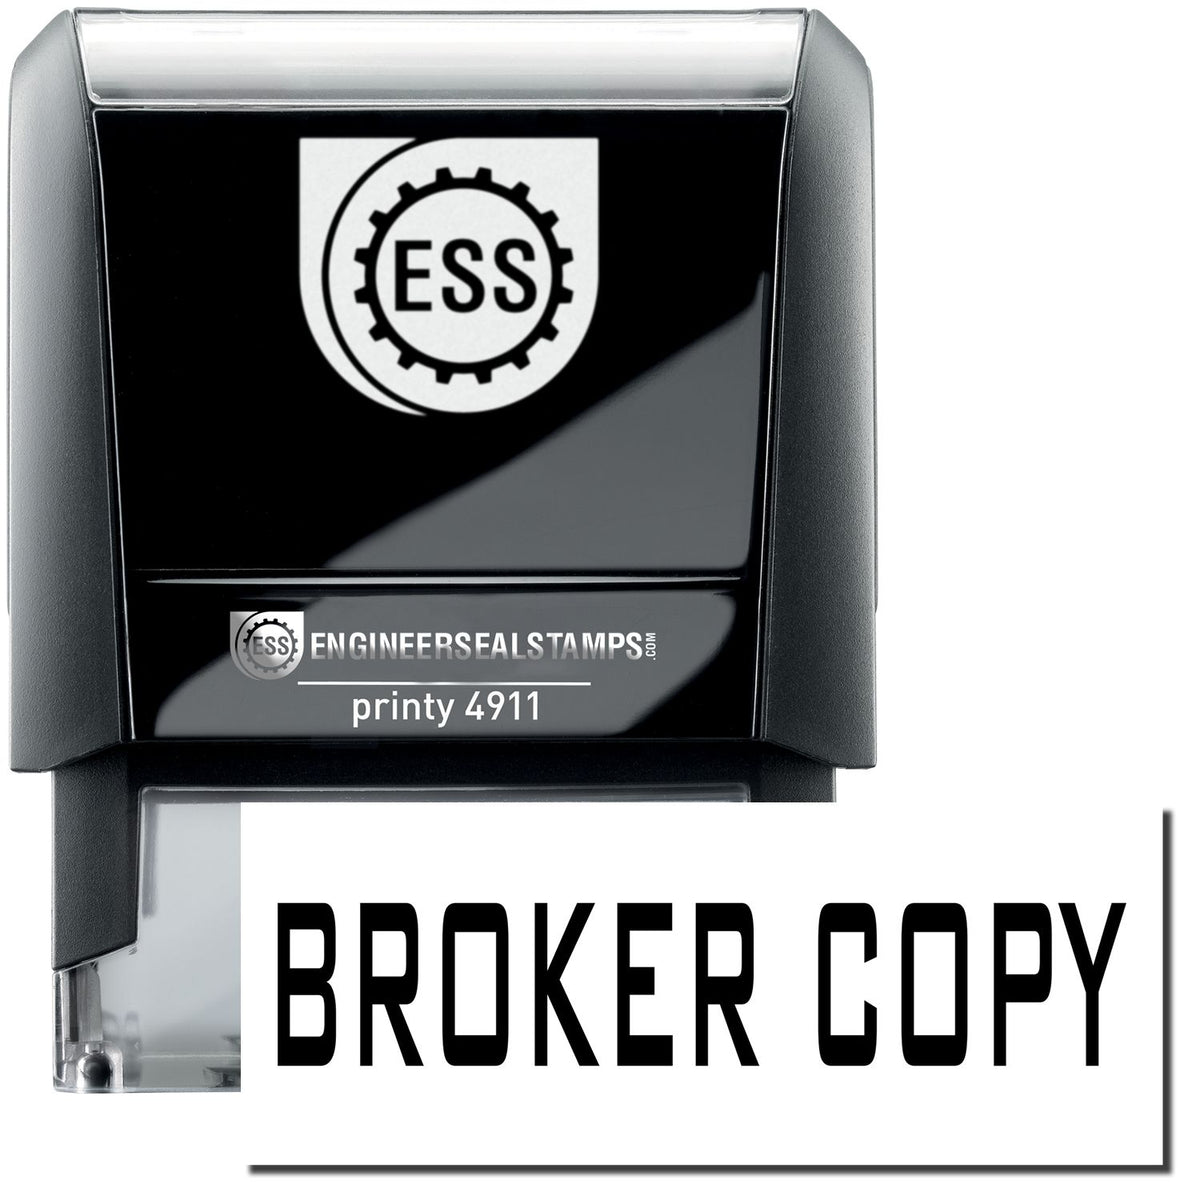 A self-inking stamp with a stamped image showing how the text &quot;BROKER COPY&quot; is displayed after stamping.